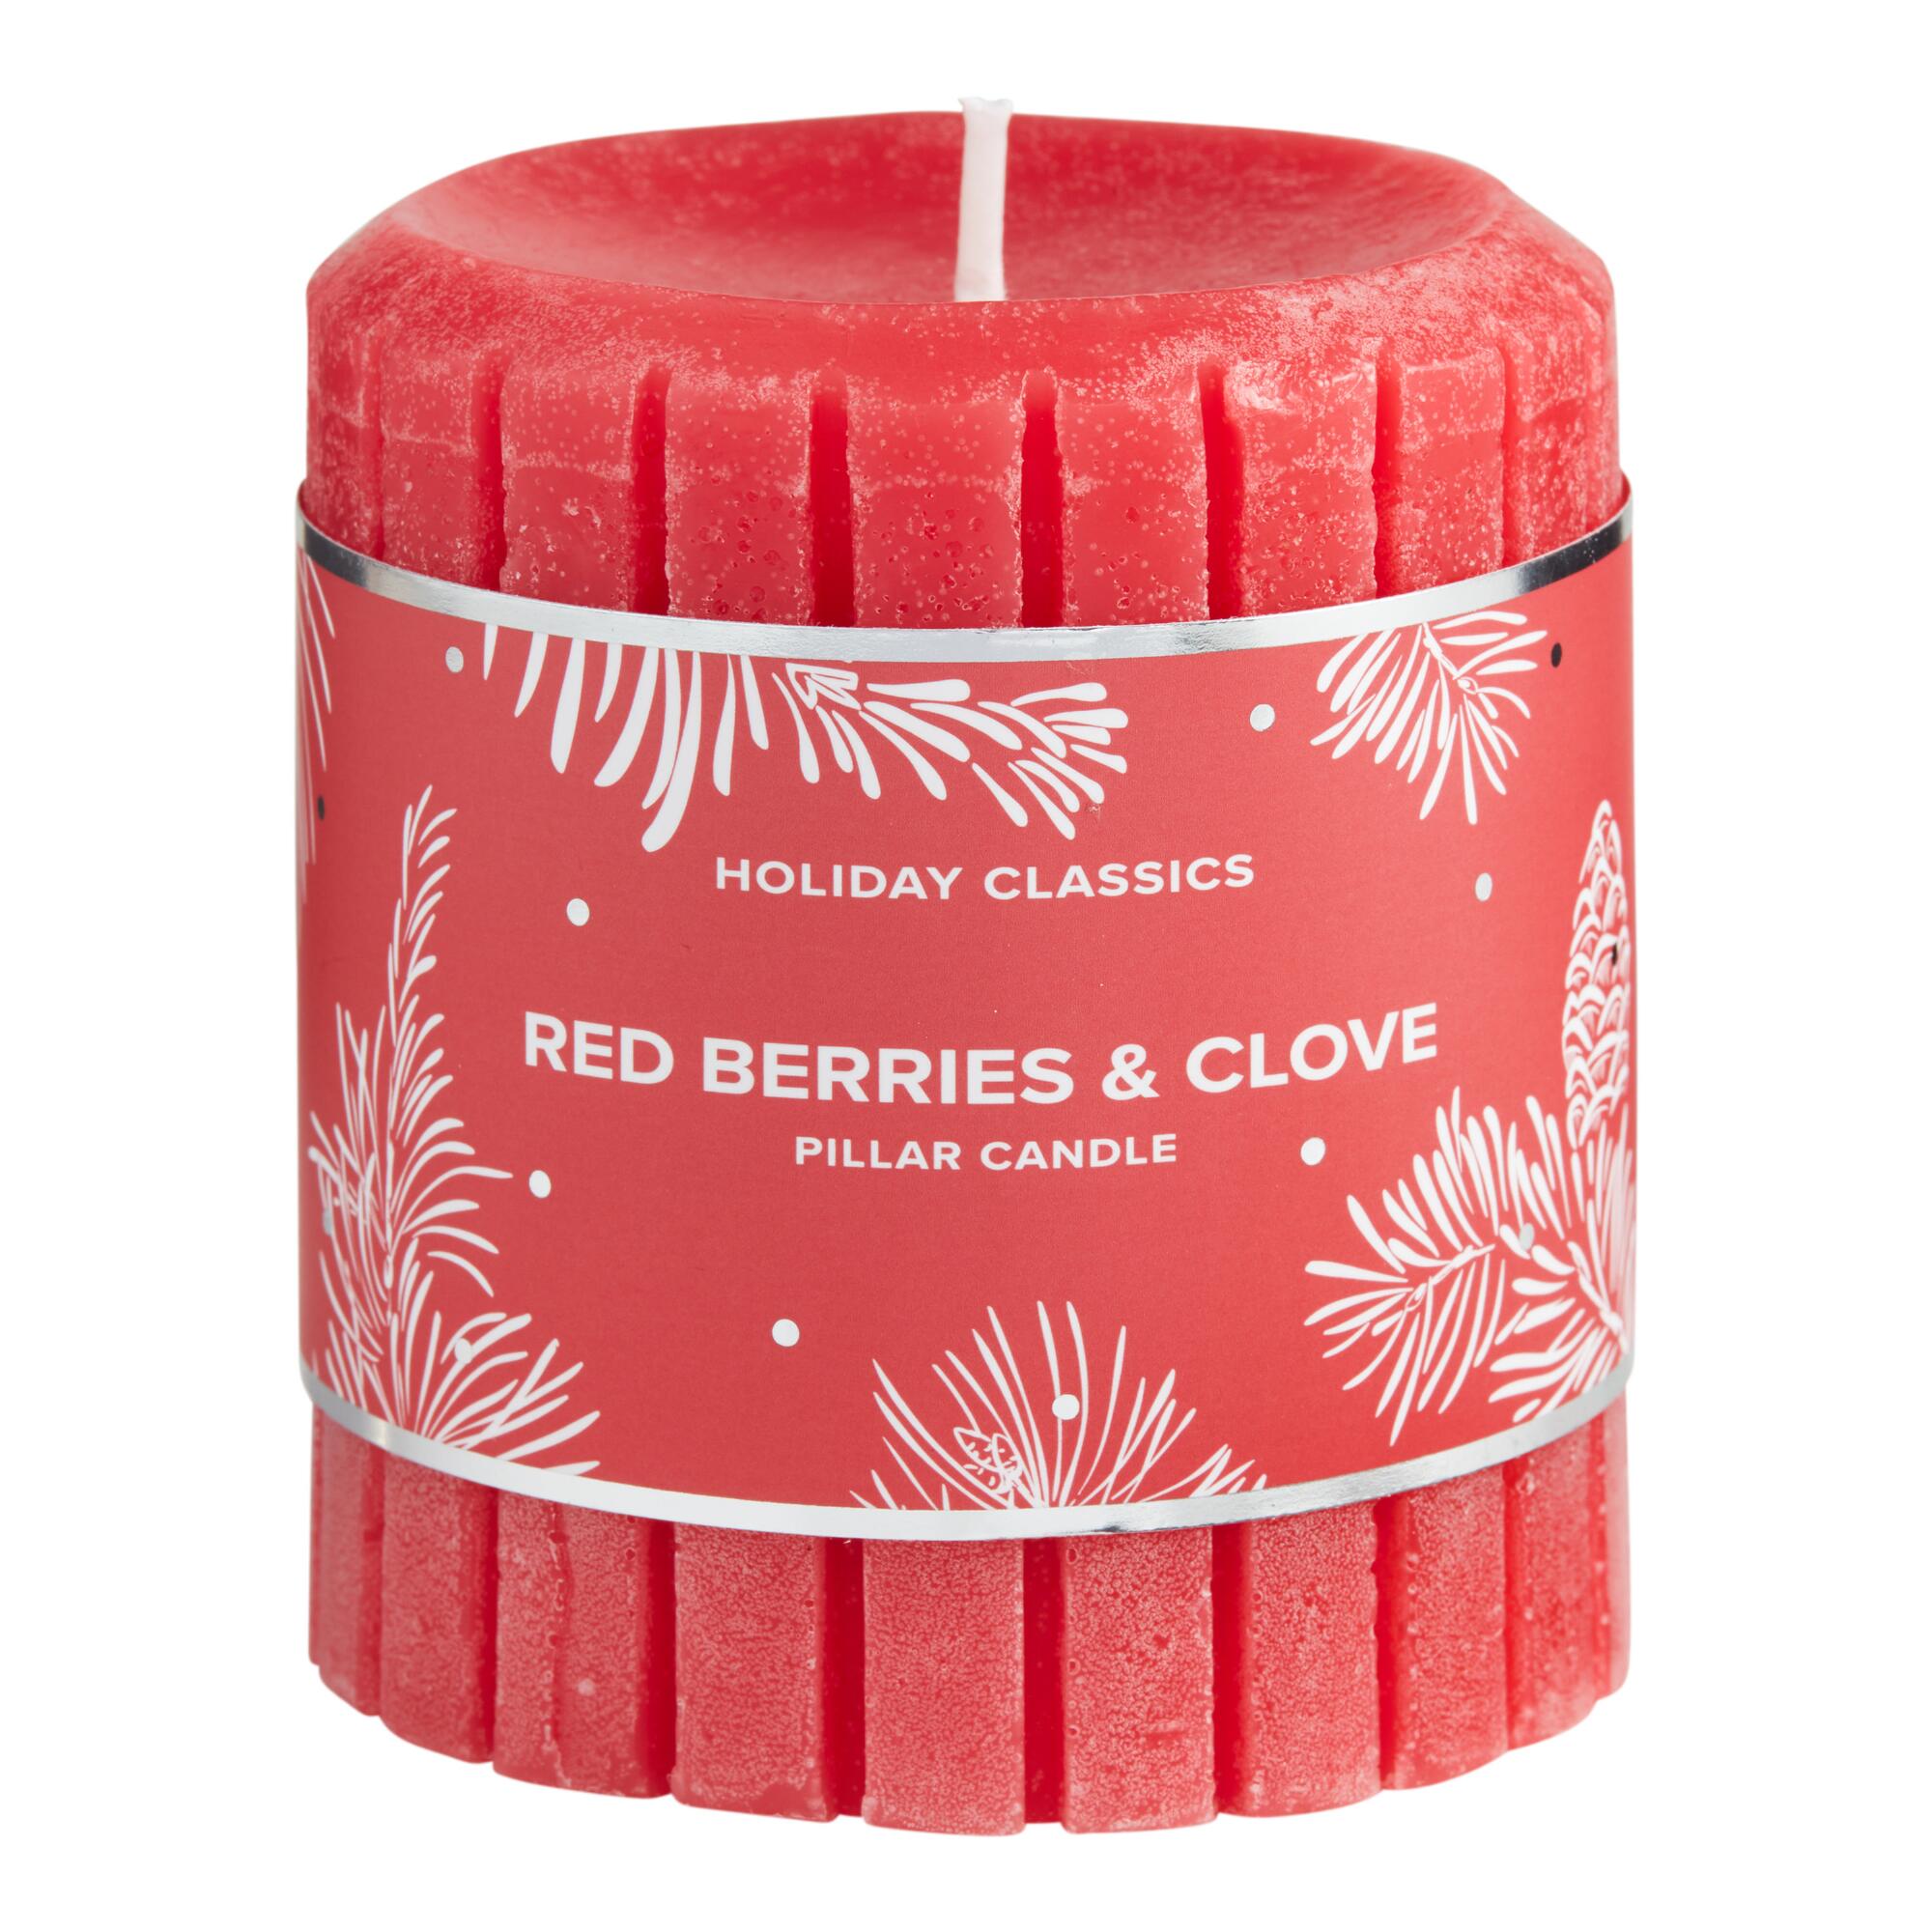 3 Inch Red Berries and Clove Pillar Candle - Scented Wax by World Market